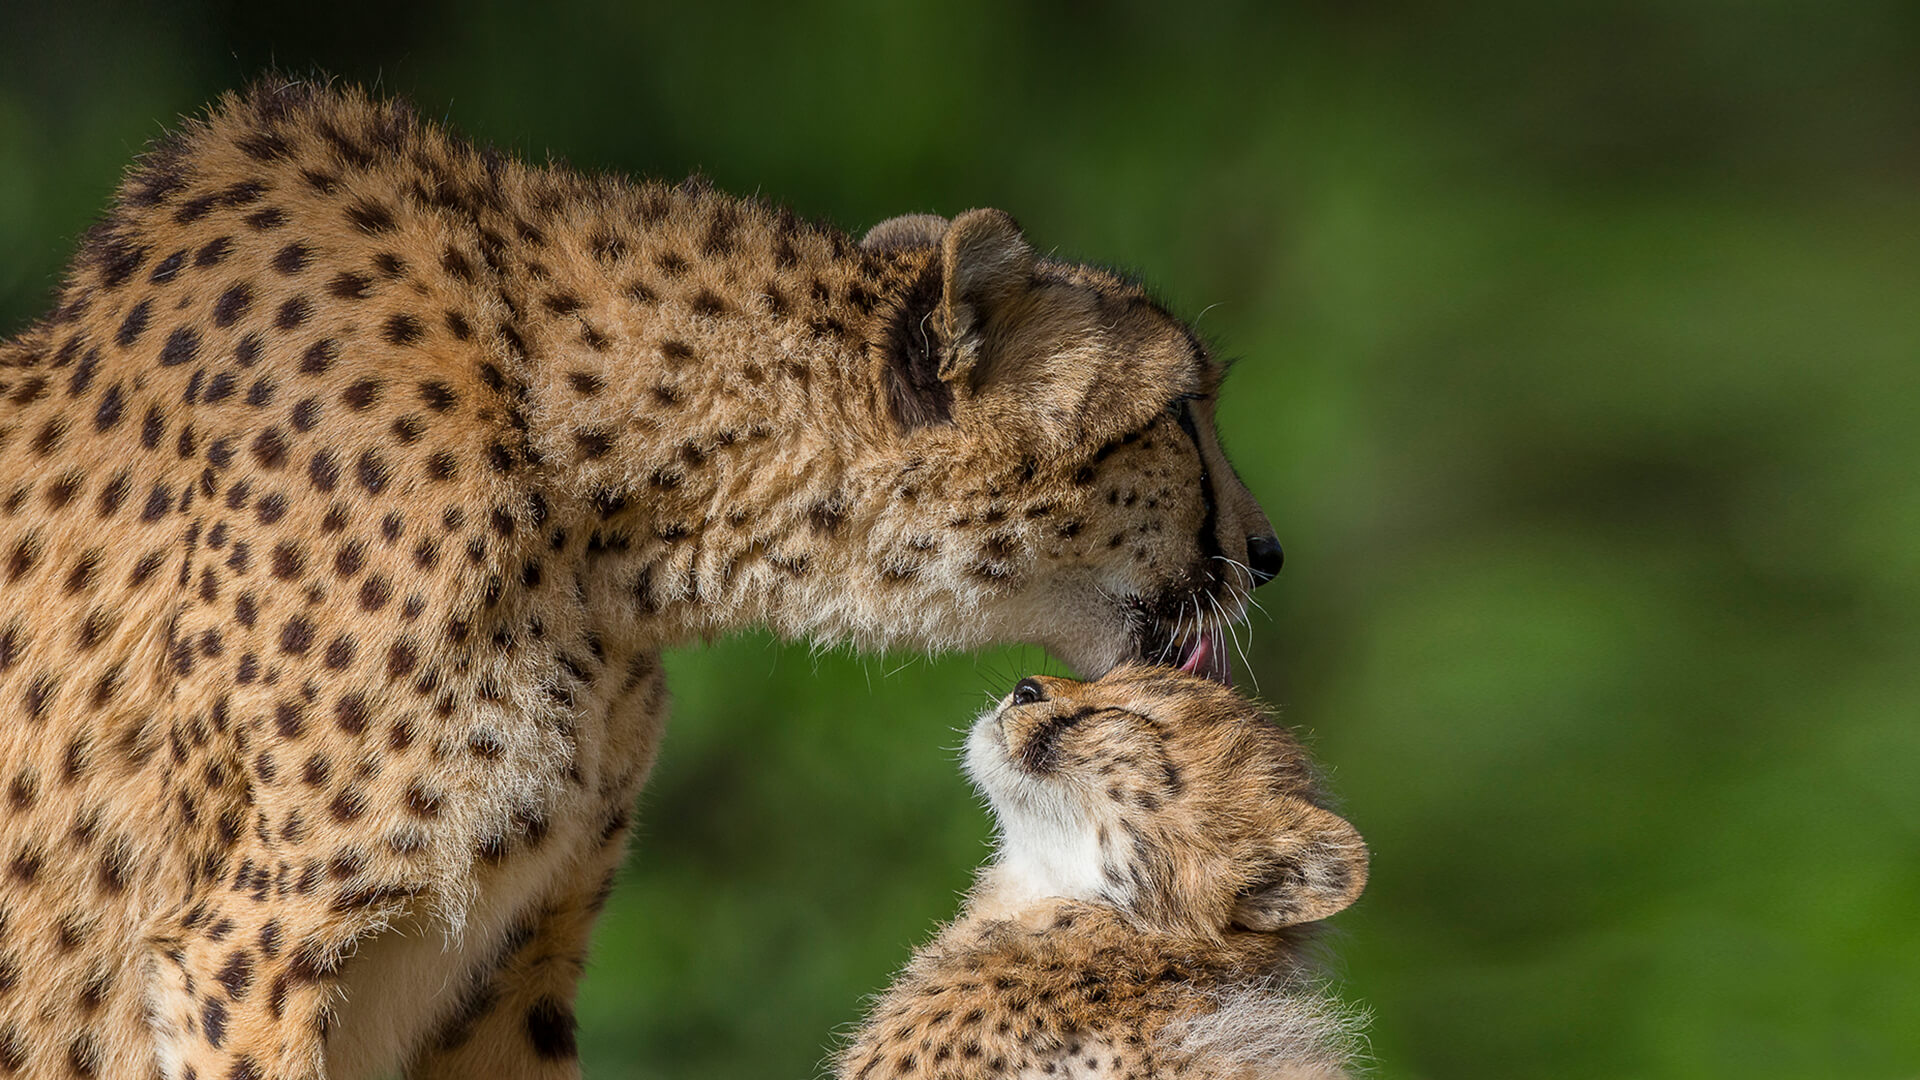 Mother cheetah grooming  young cub